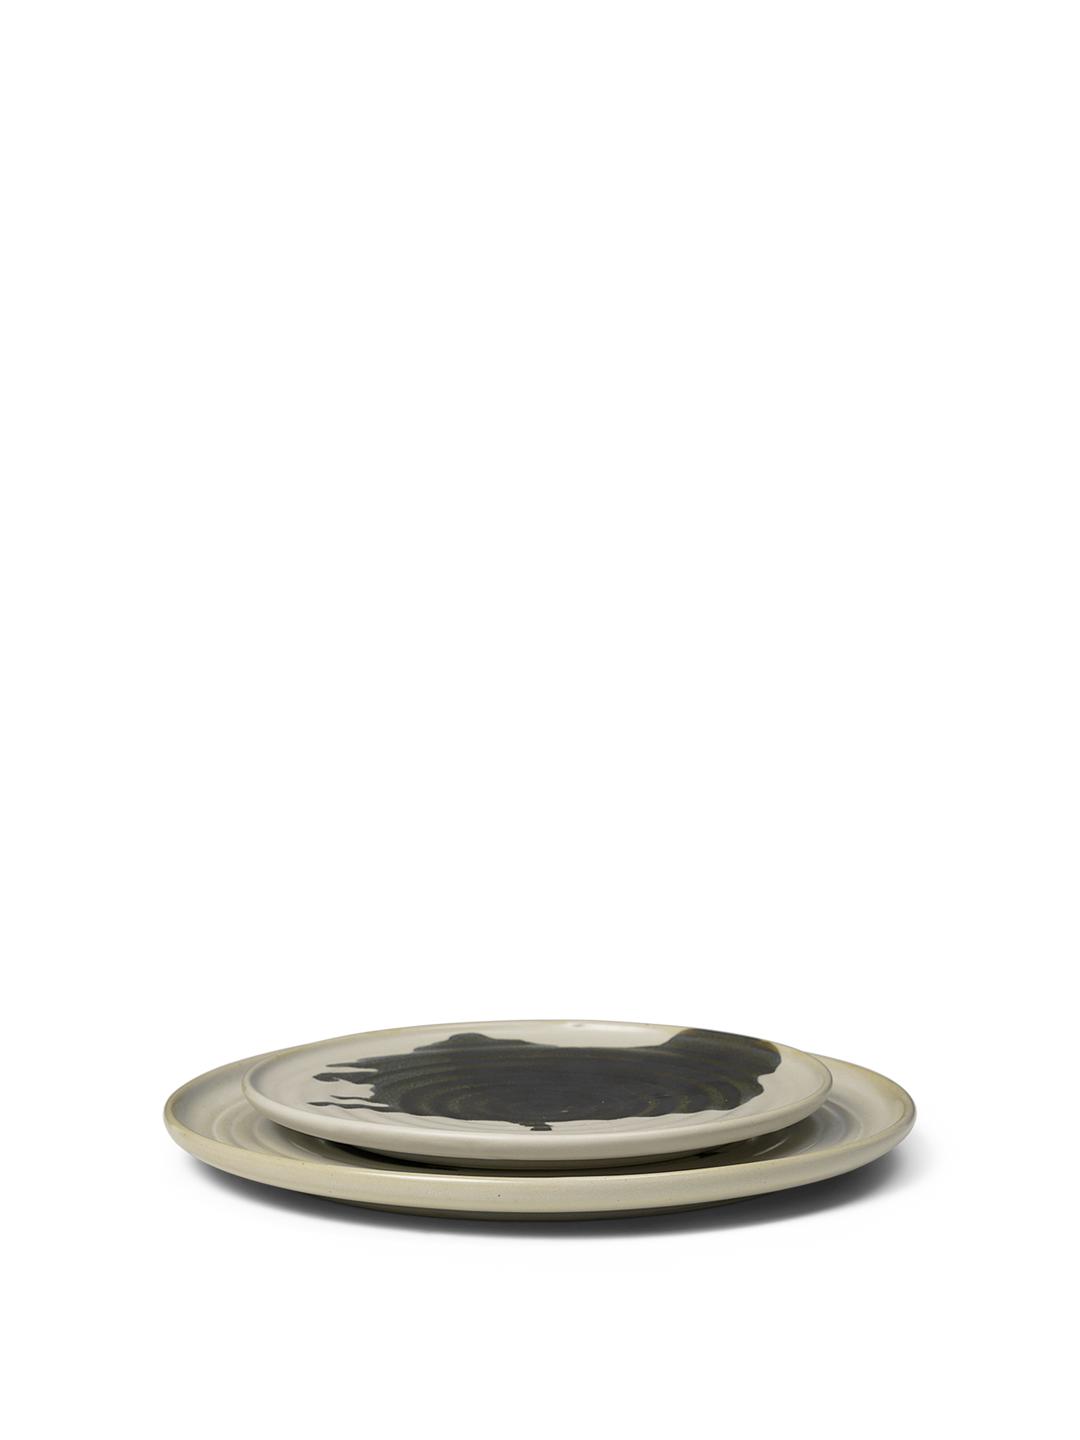 Ferm Living Omhu Plate Small, Off White/Charcoal